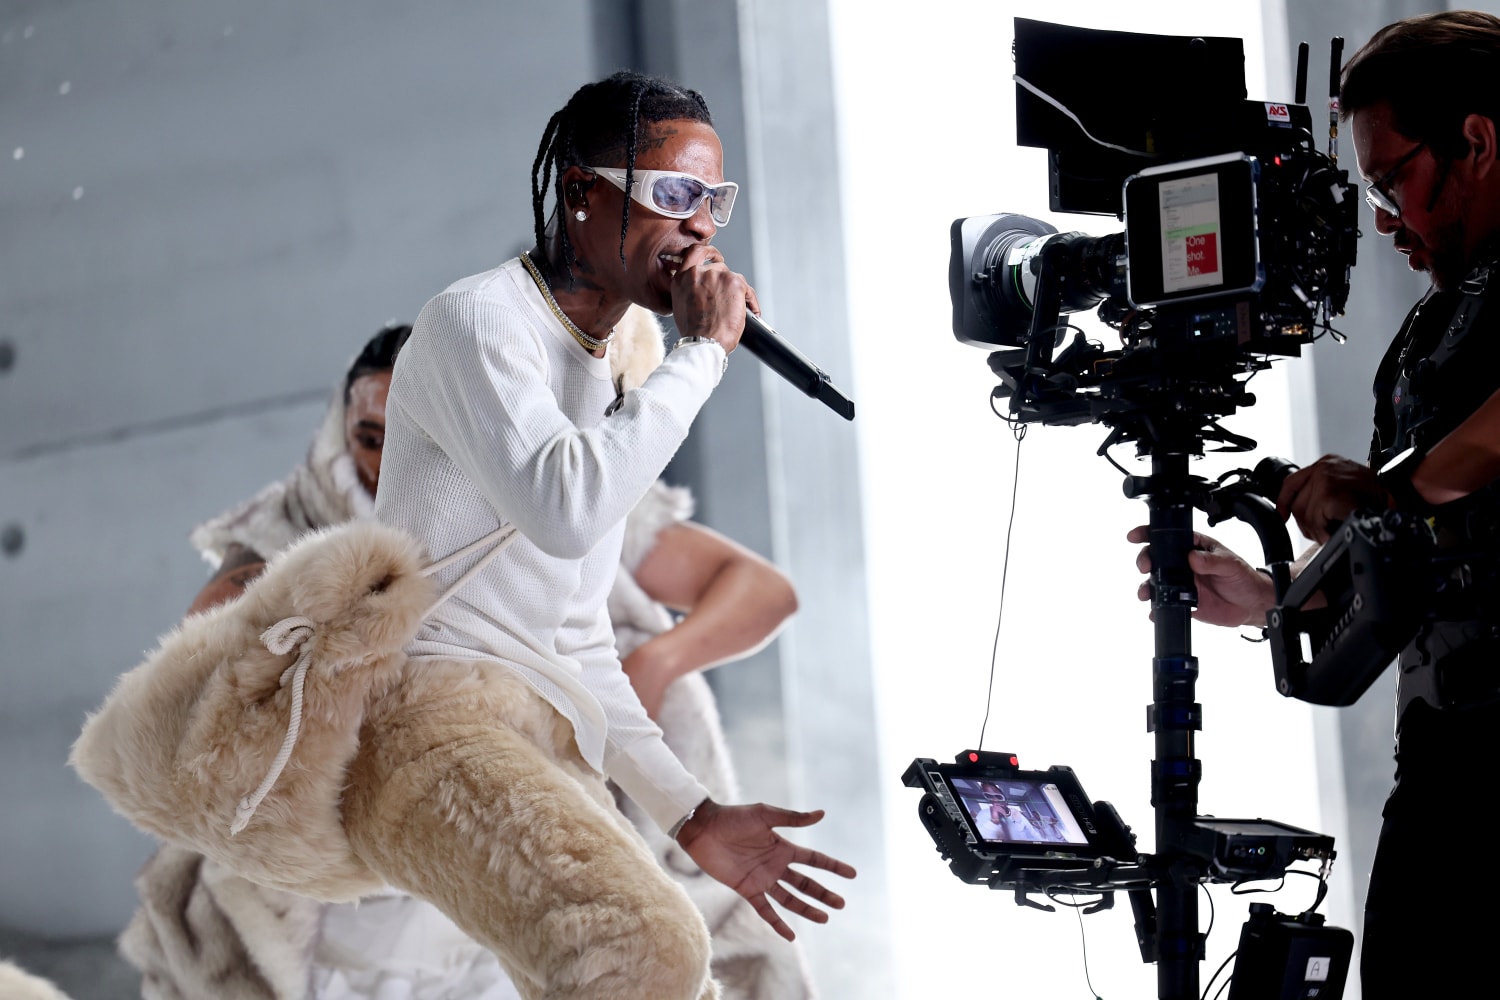 Travis Scott steps out in an all white outfit while leaving a